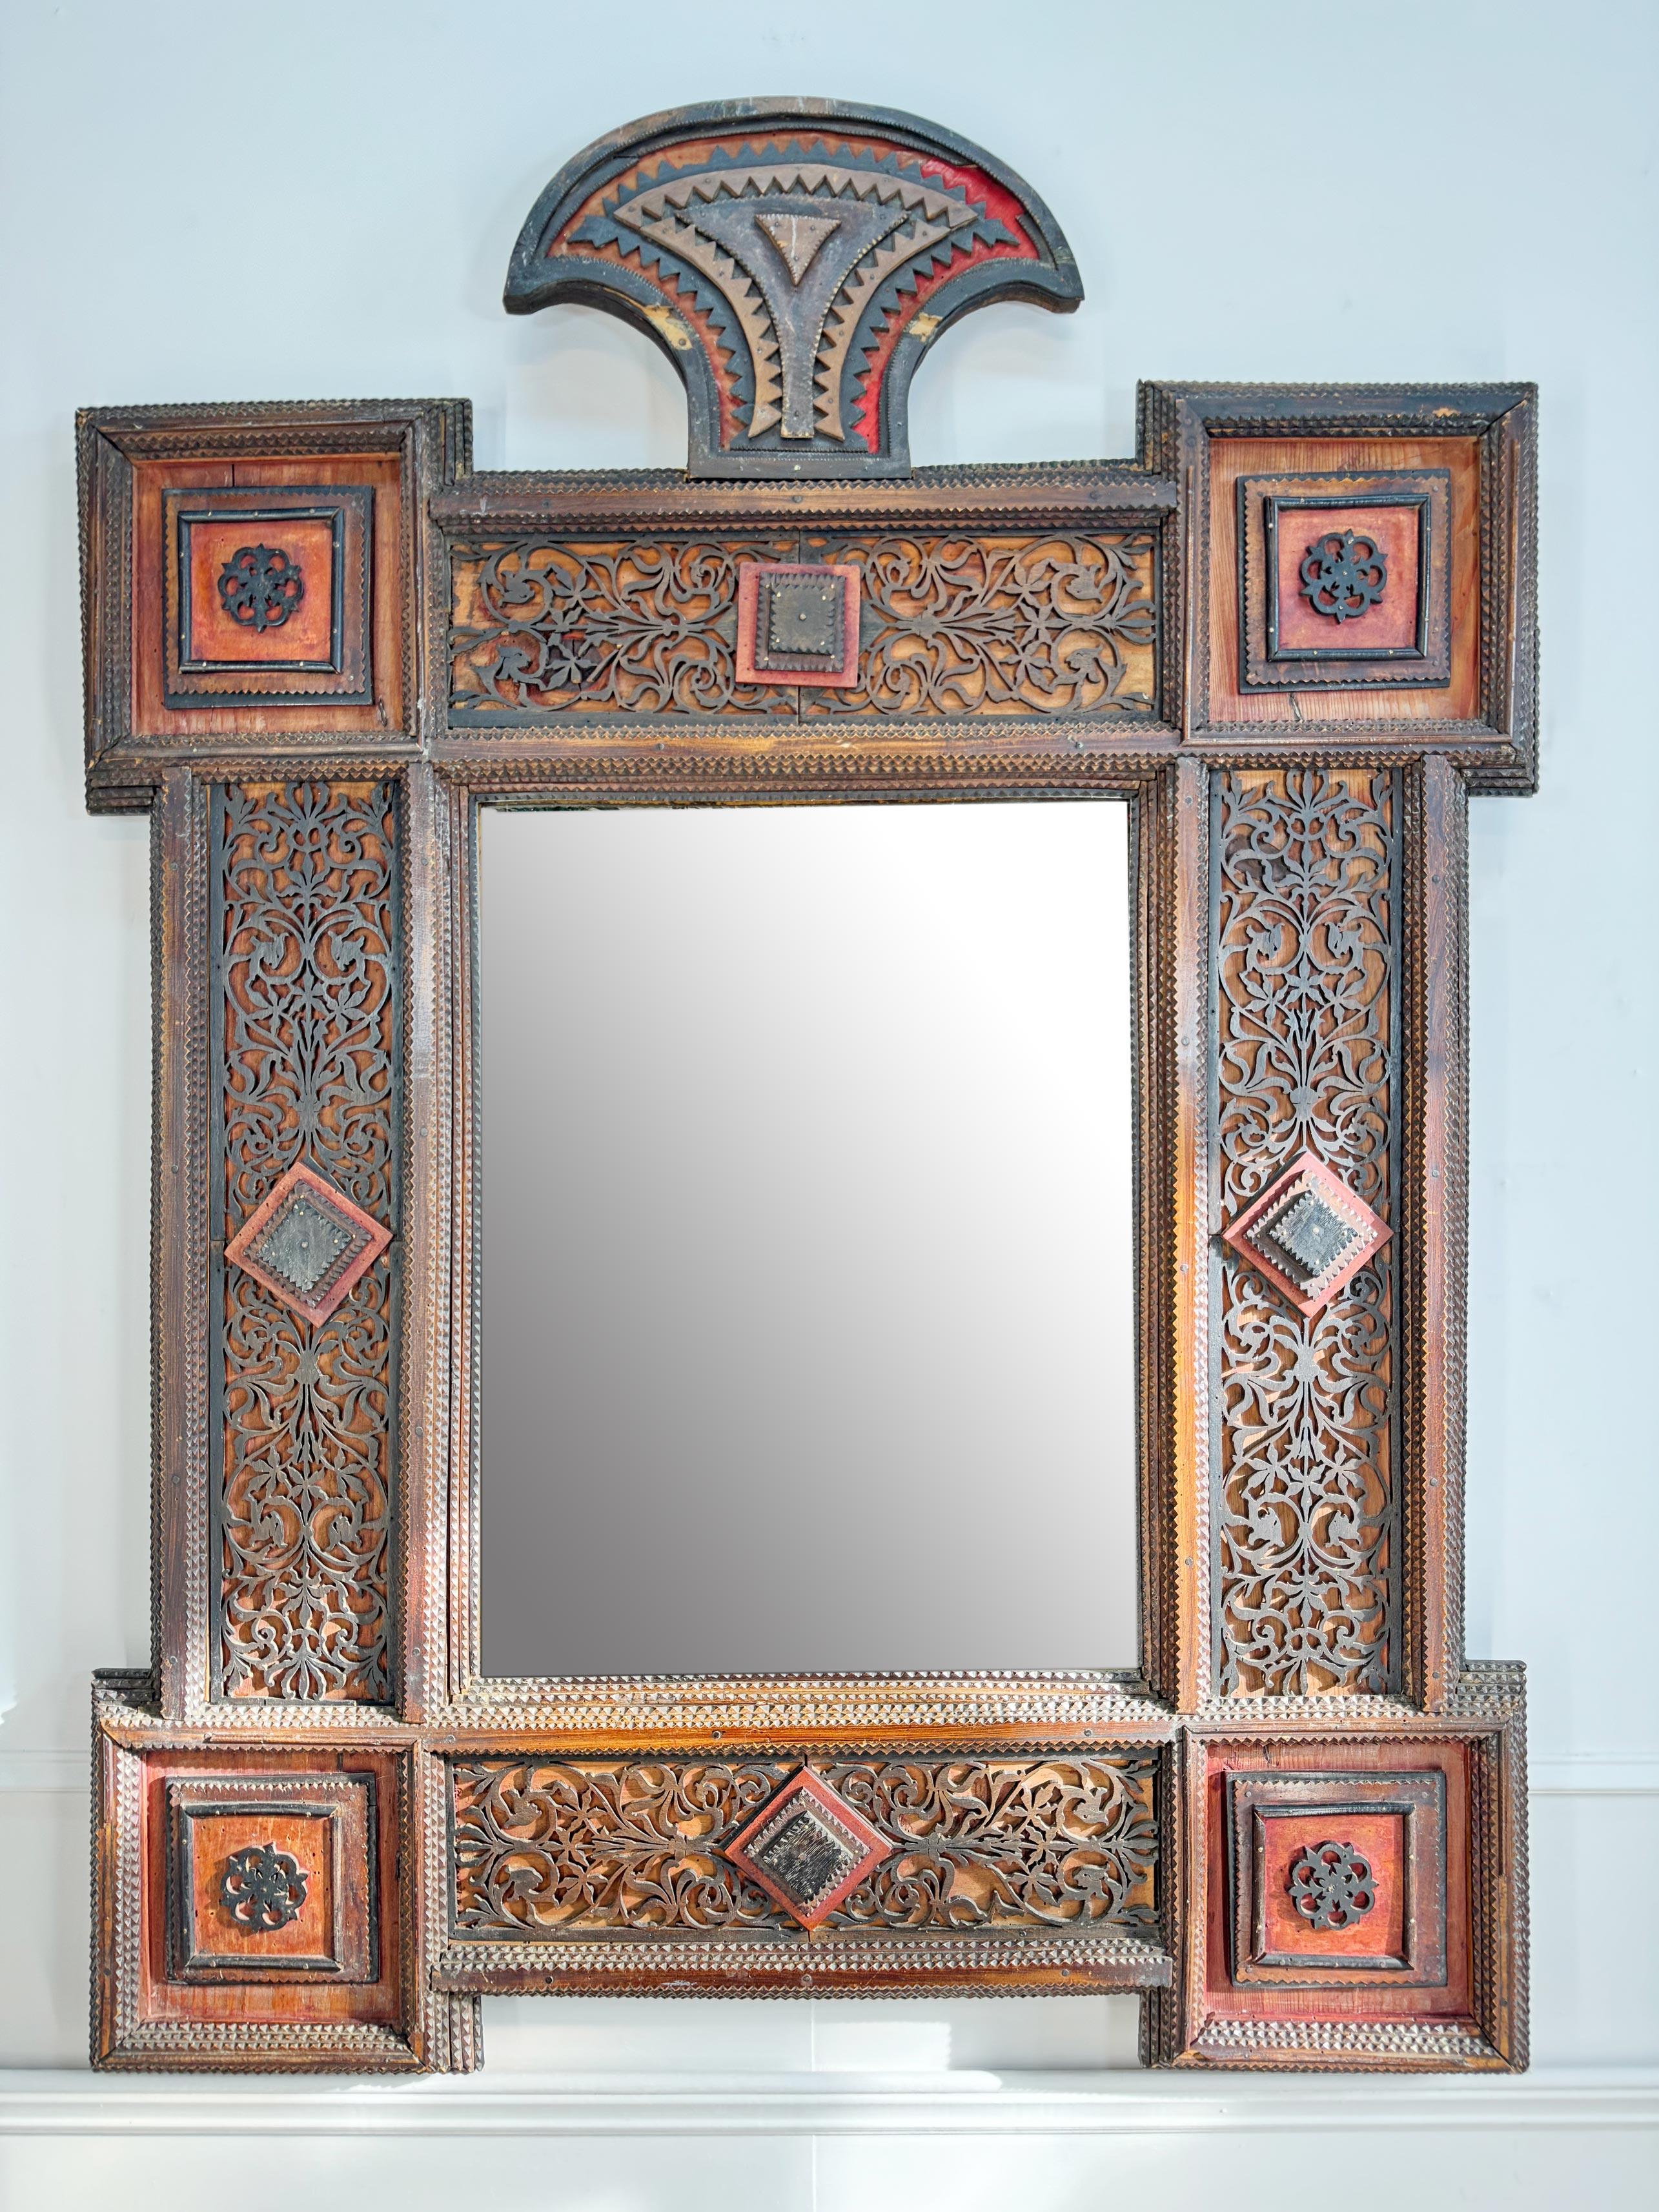 19th Century German Crested Tramp Art Mirror with Fretwork Detailing For Sale 7